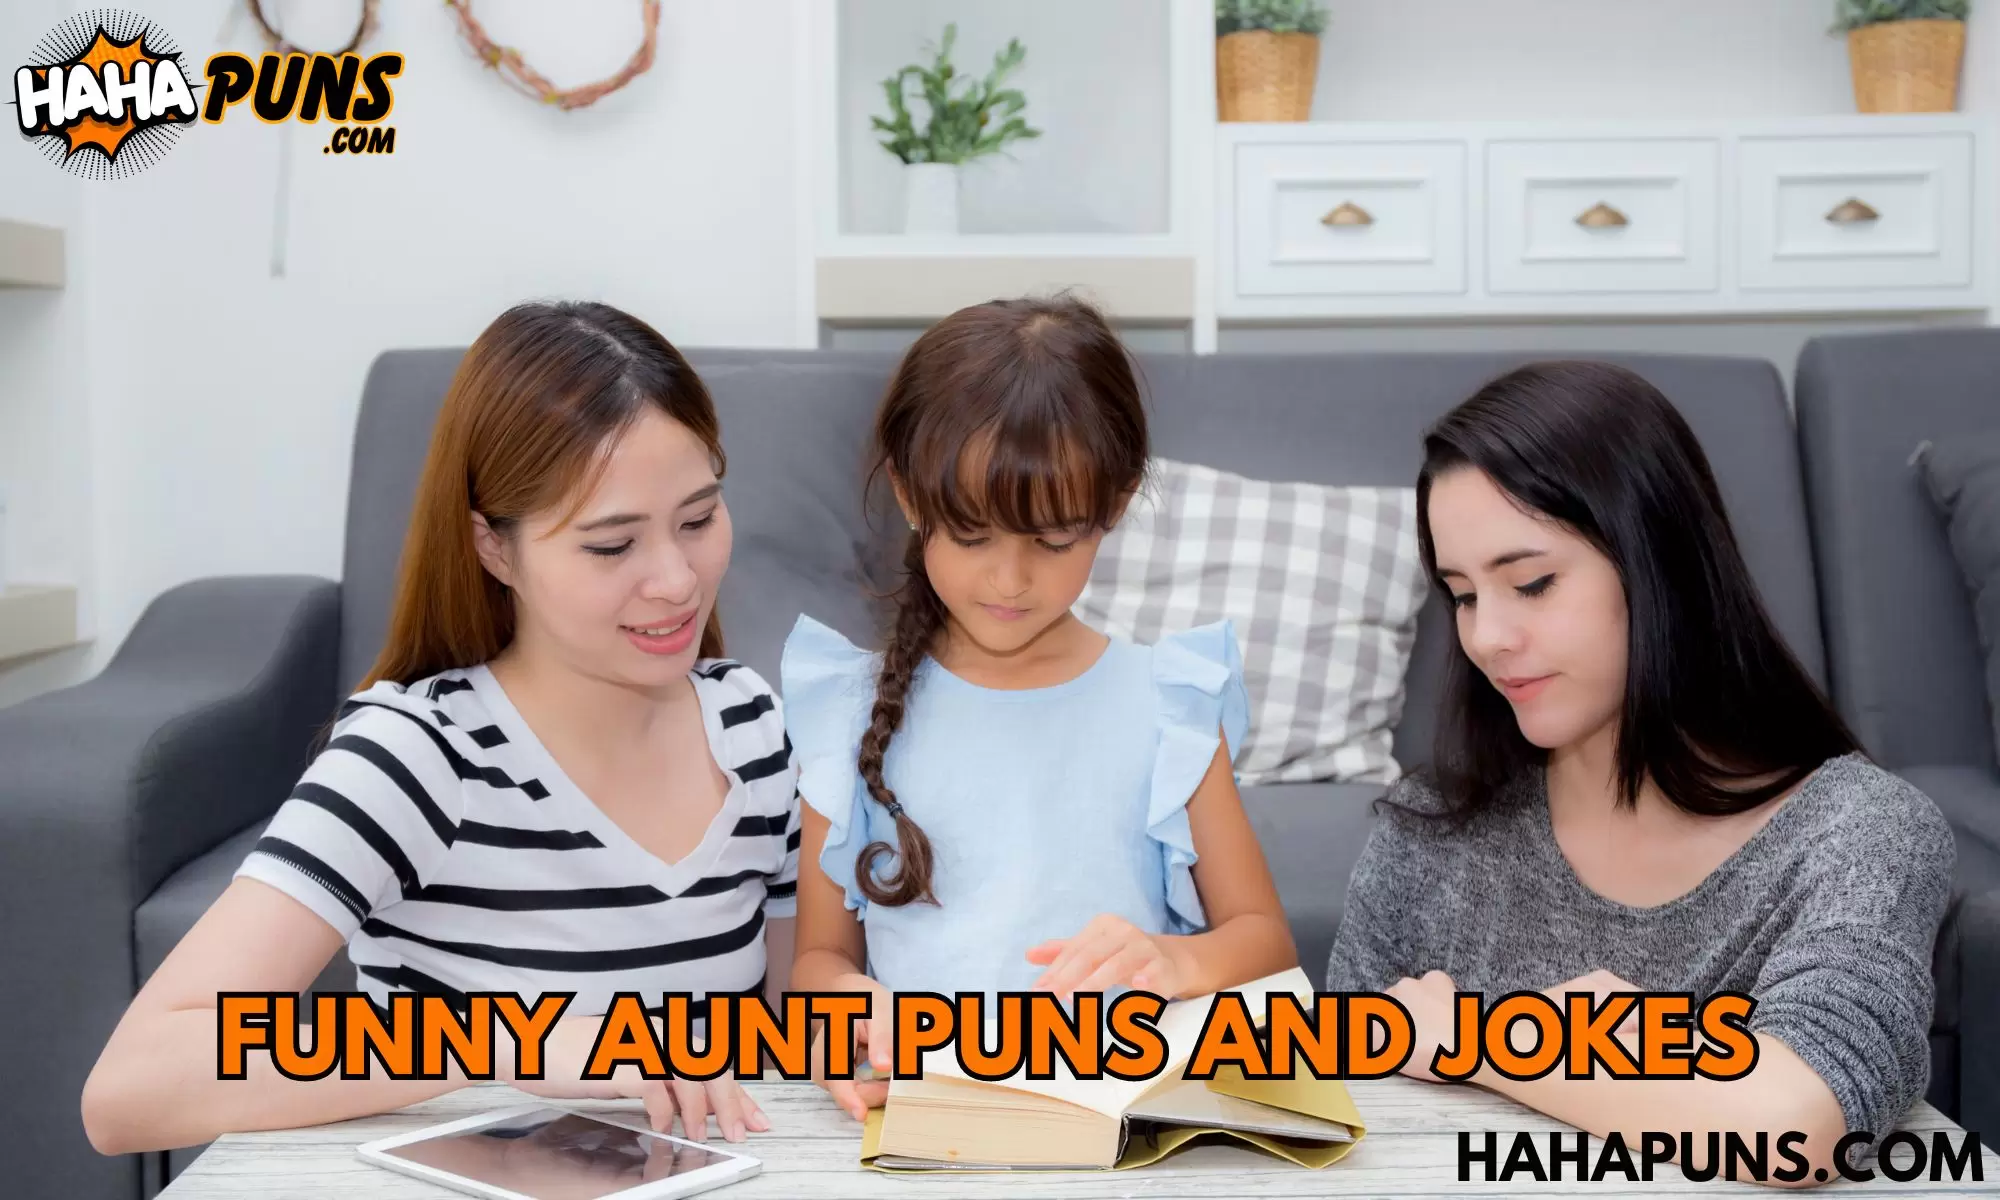 Funny Aunt Puns And Jokes